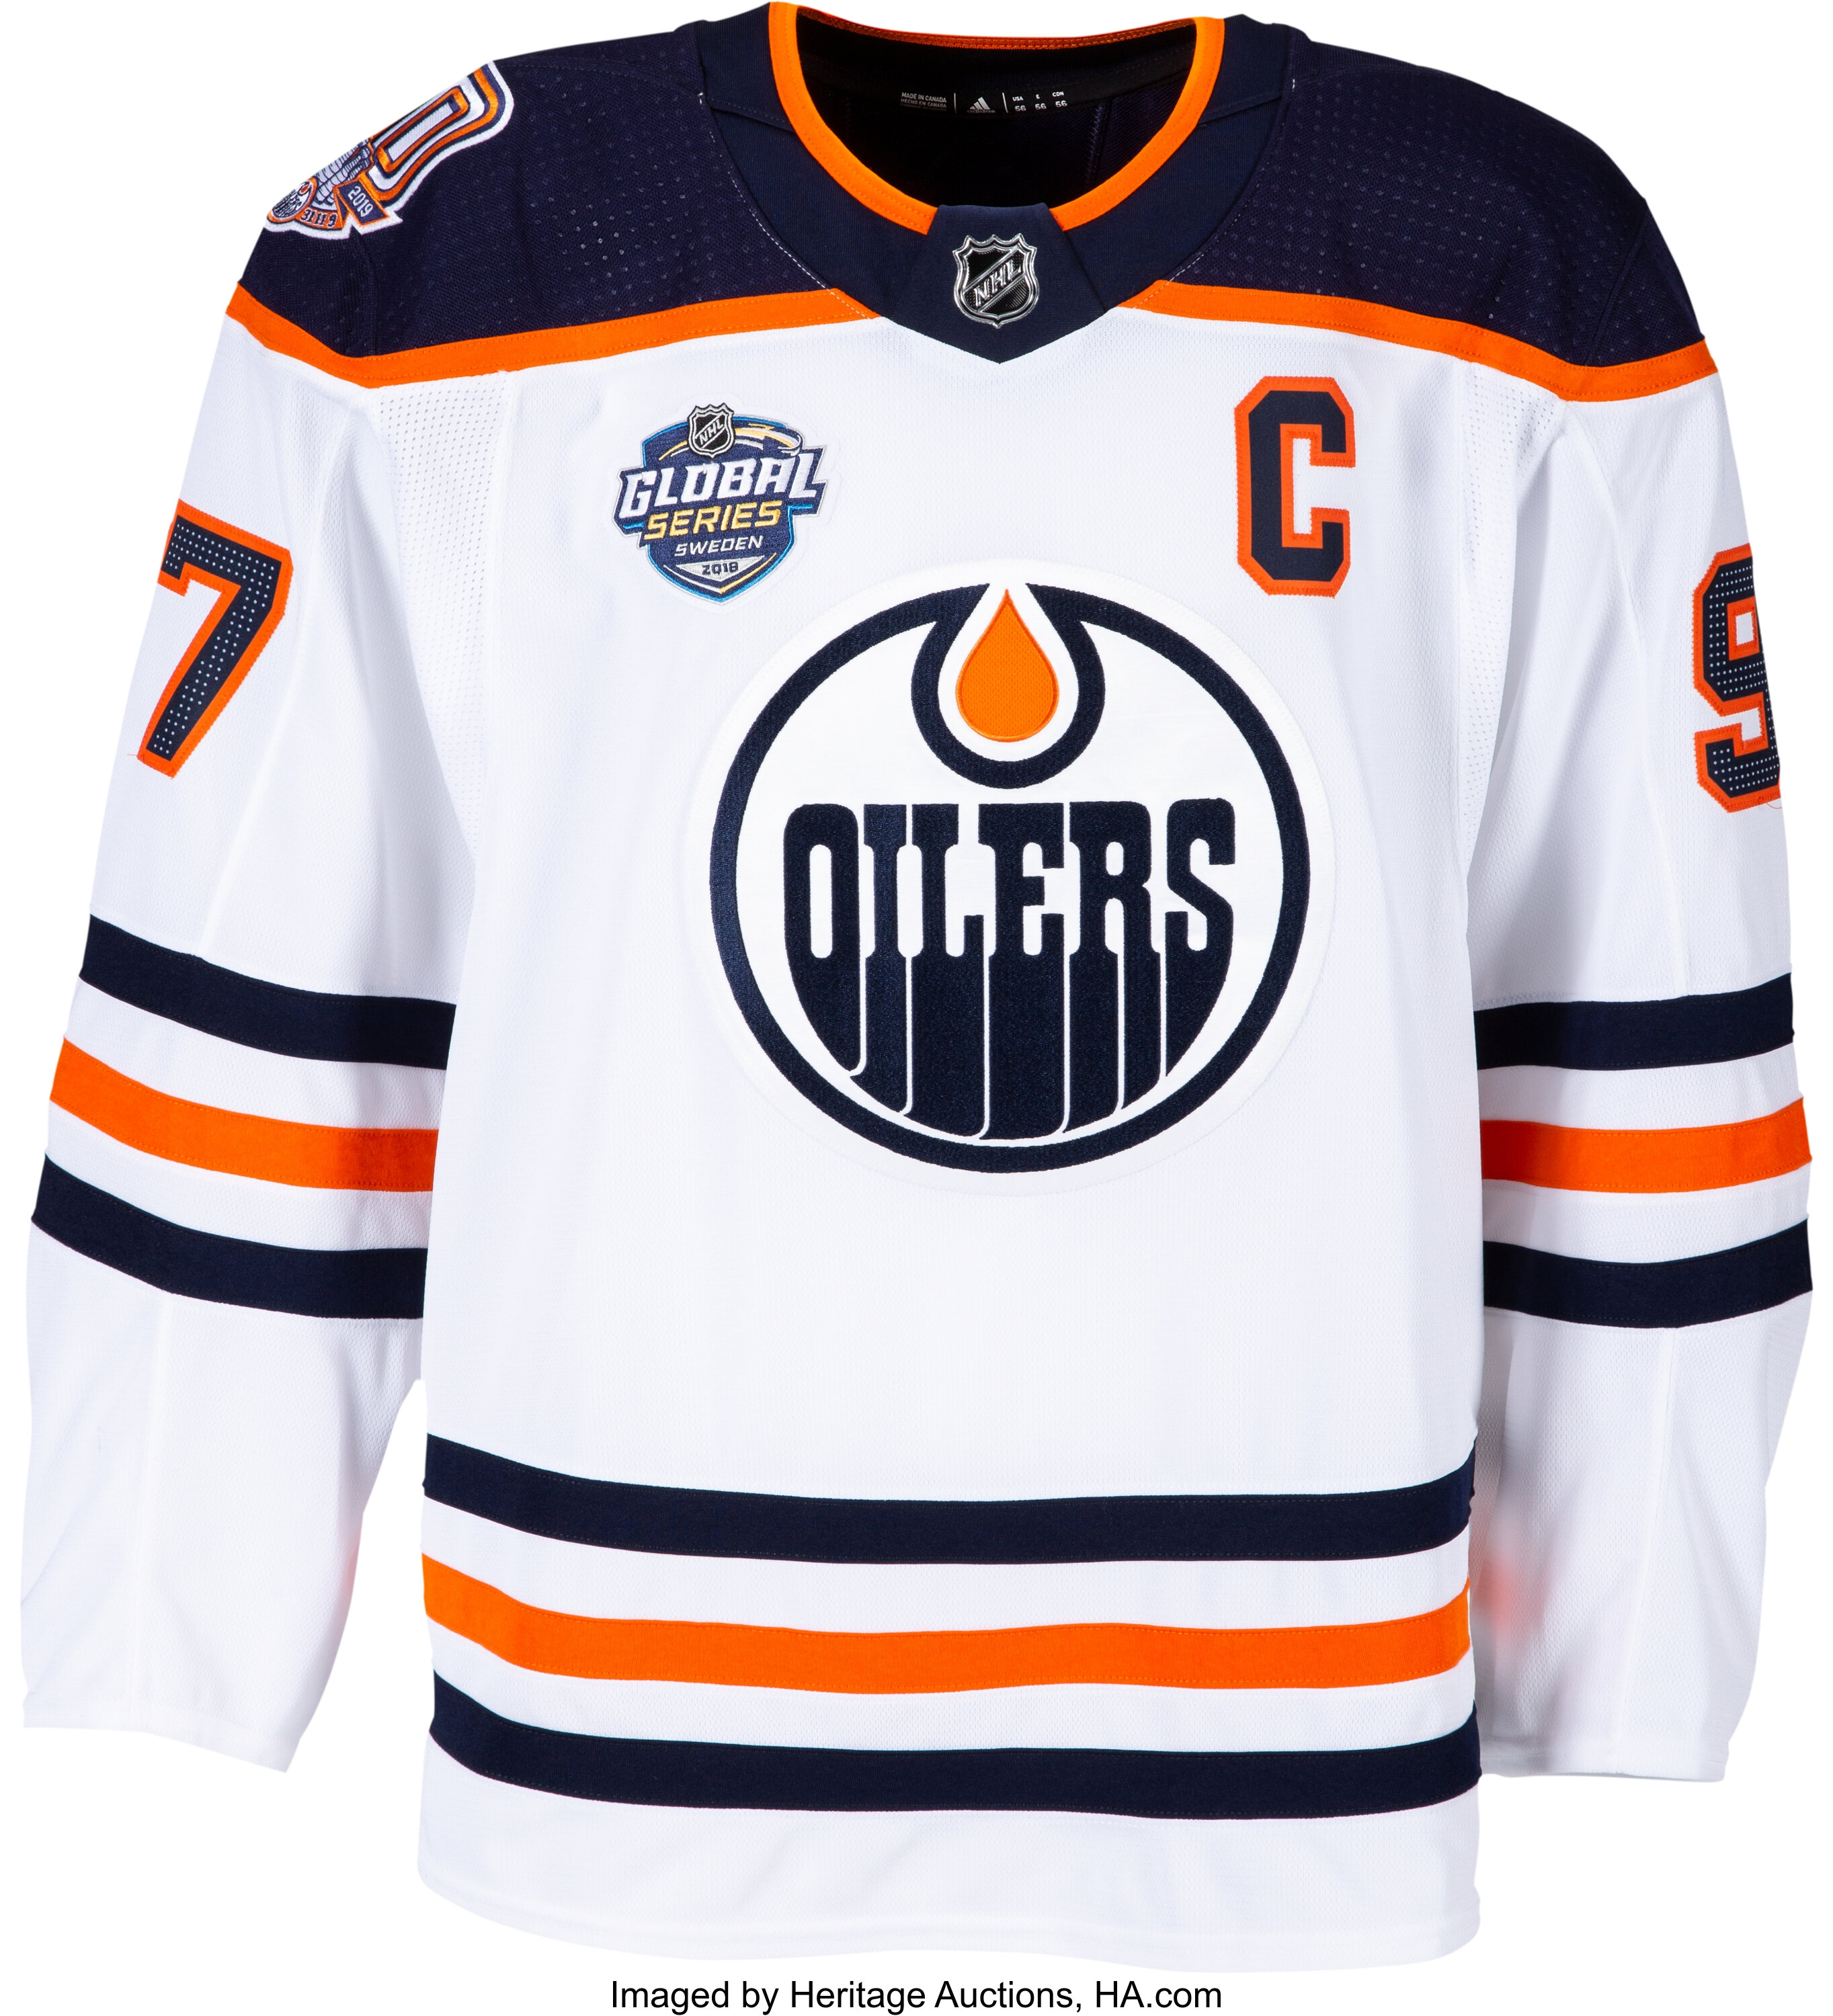 The Edmonton Oilers are widely believed to be interested in